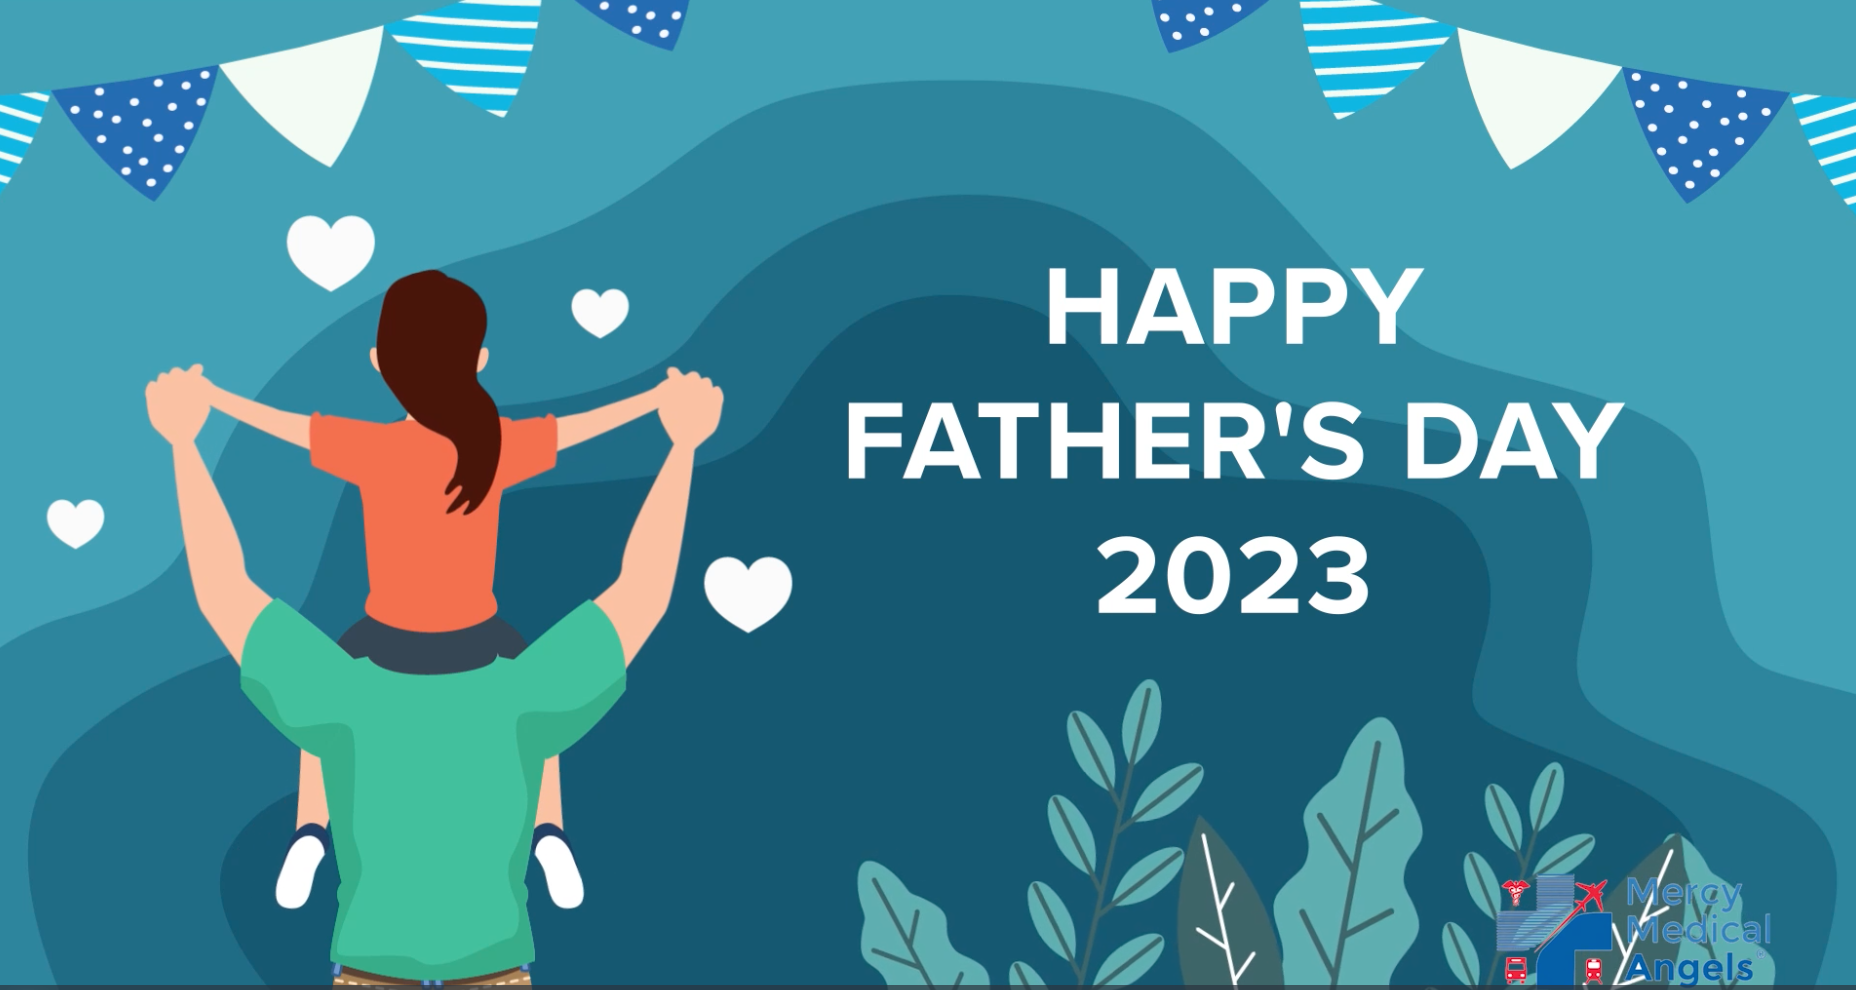 Father's Day greetings from Mercy Medical Angels